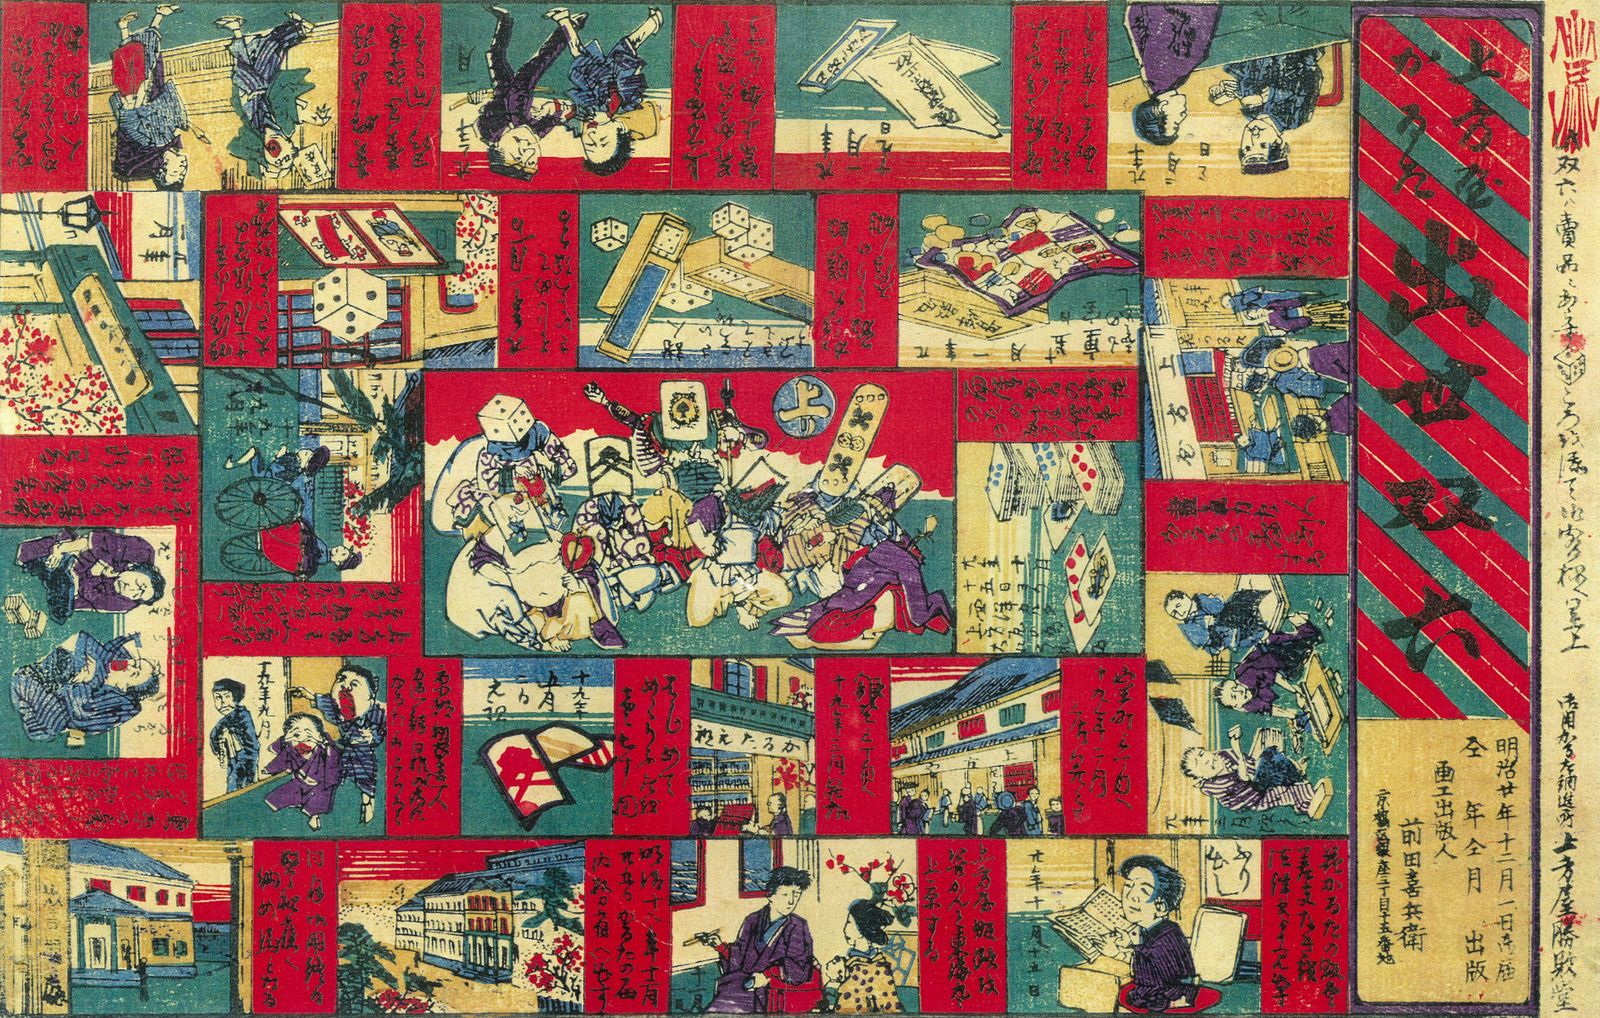 A Japanese sugoroku board game with images spiraling in counter-clockwise from the outside to the center, showing scenes of Maeda applying to the police to open his store, along with products such as cards and dice.